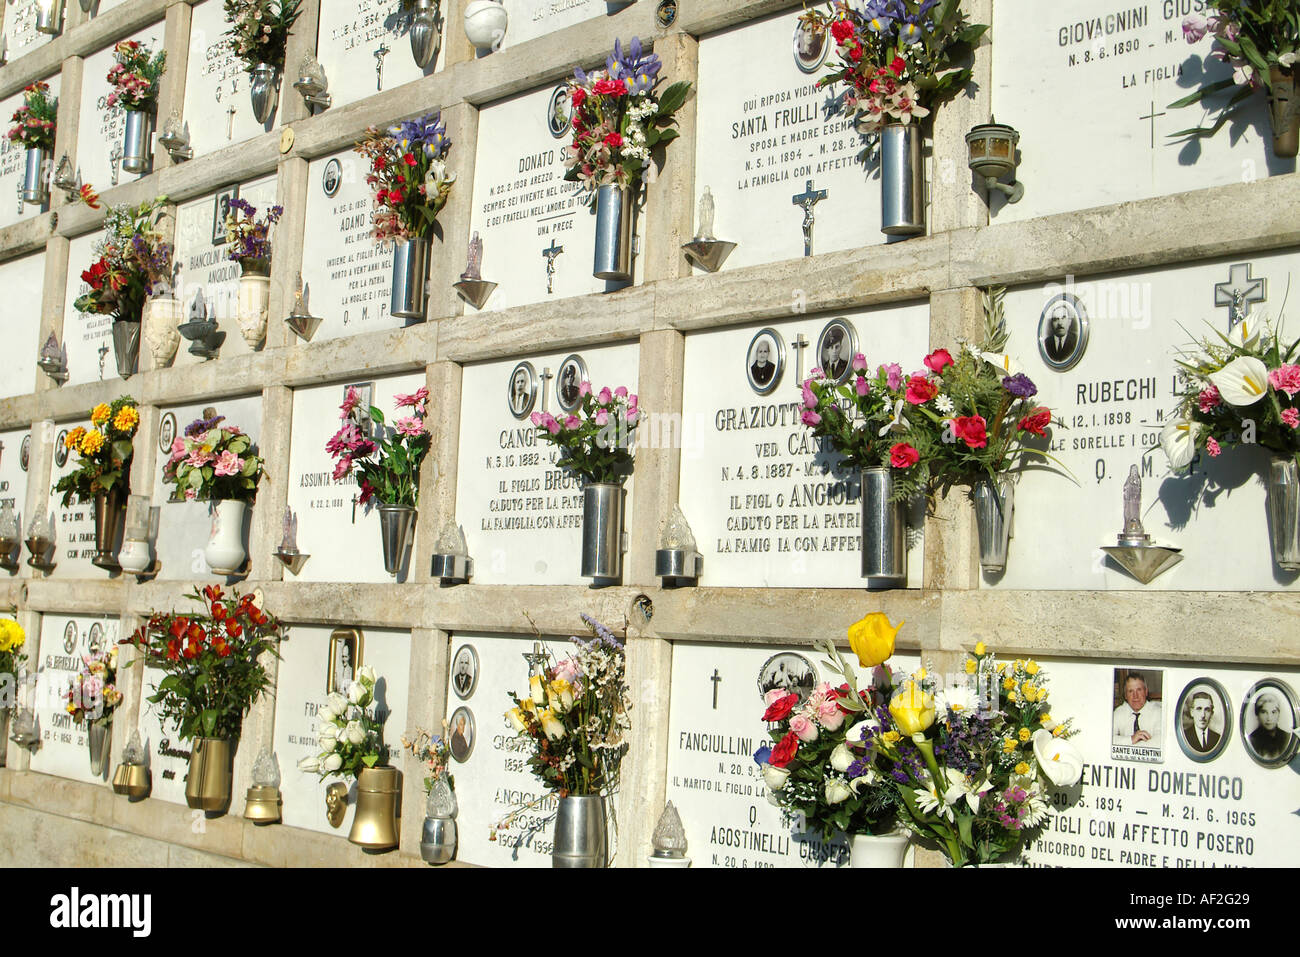 Italian cemetery with wall graves Stock Photo - Alamy